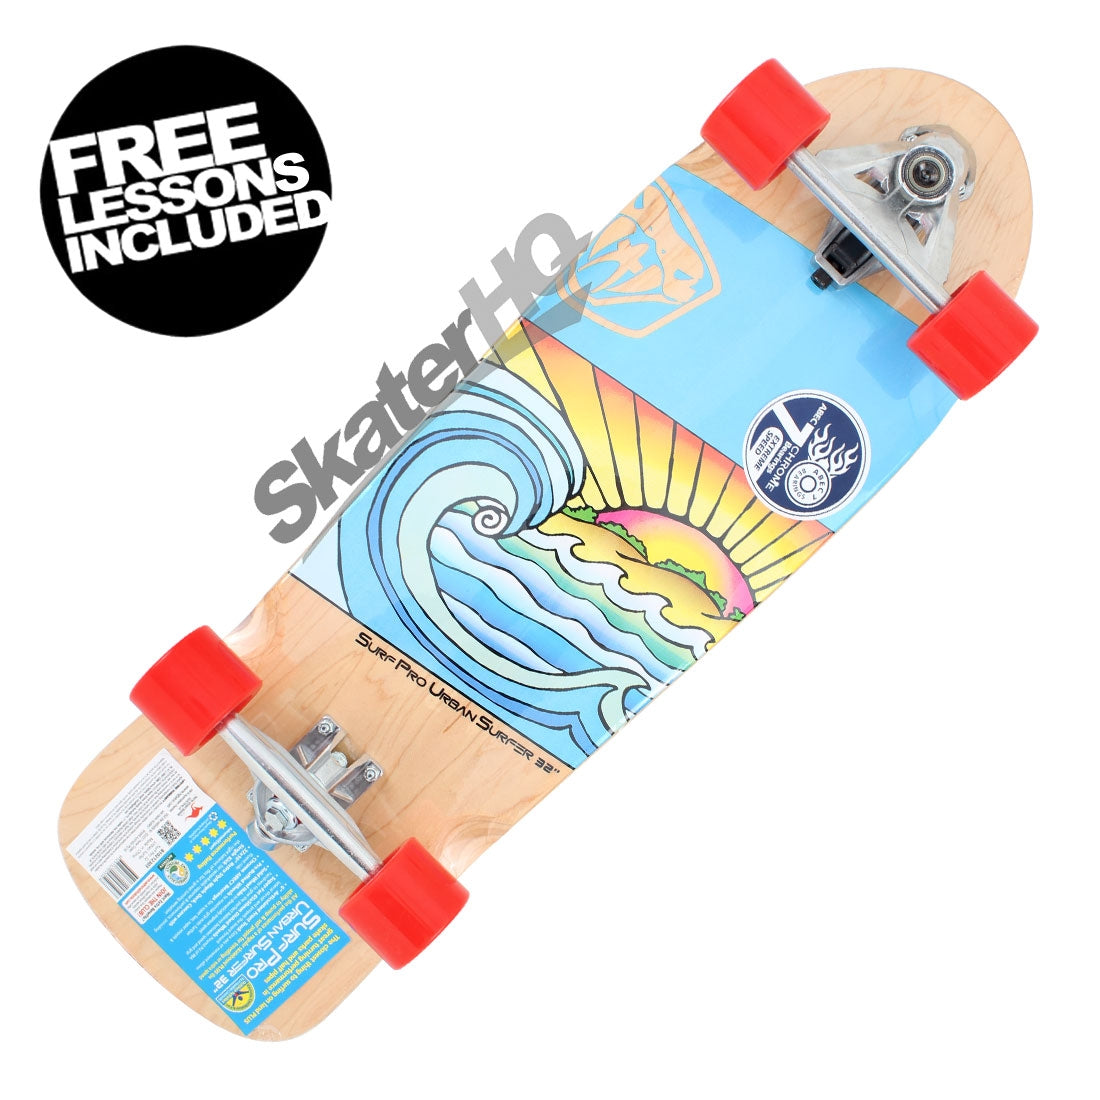 Surf Pro 32 Urban Surfer Skateboard Compl Carving and Specialty